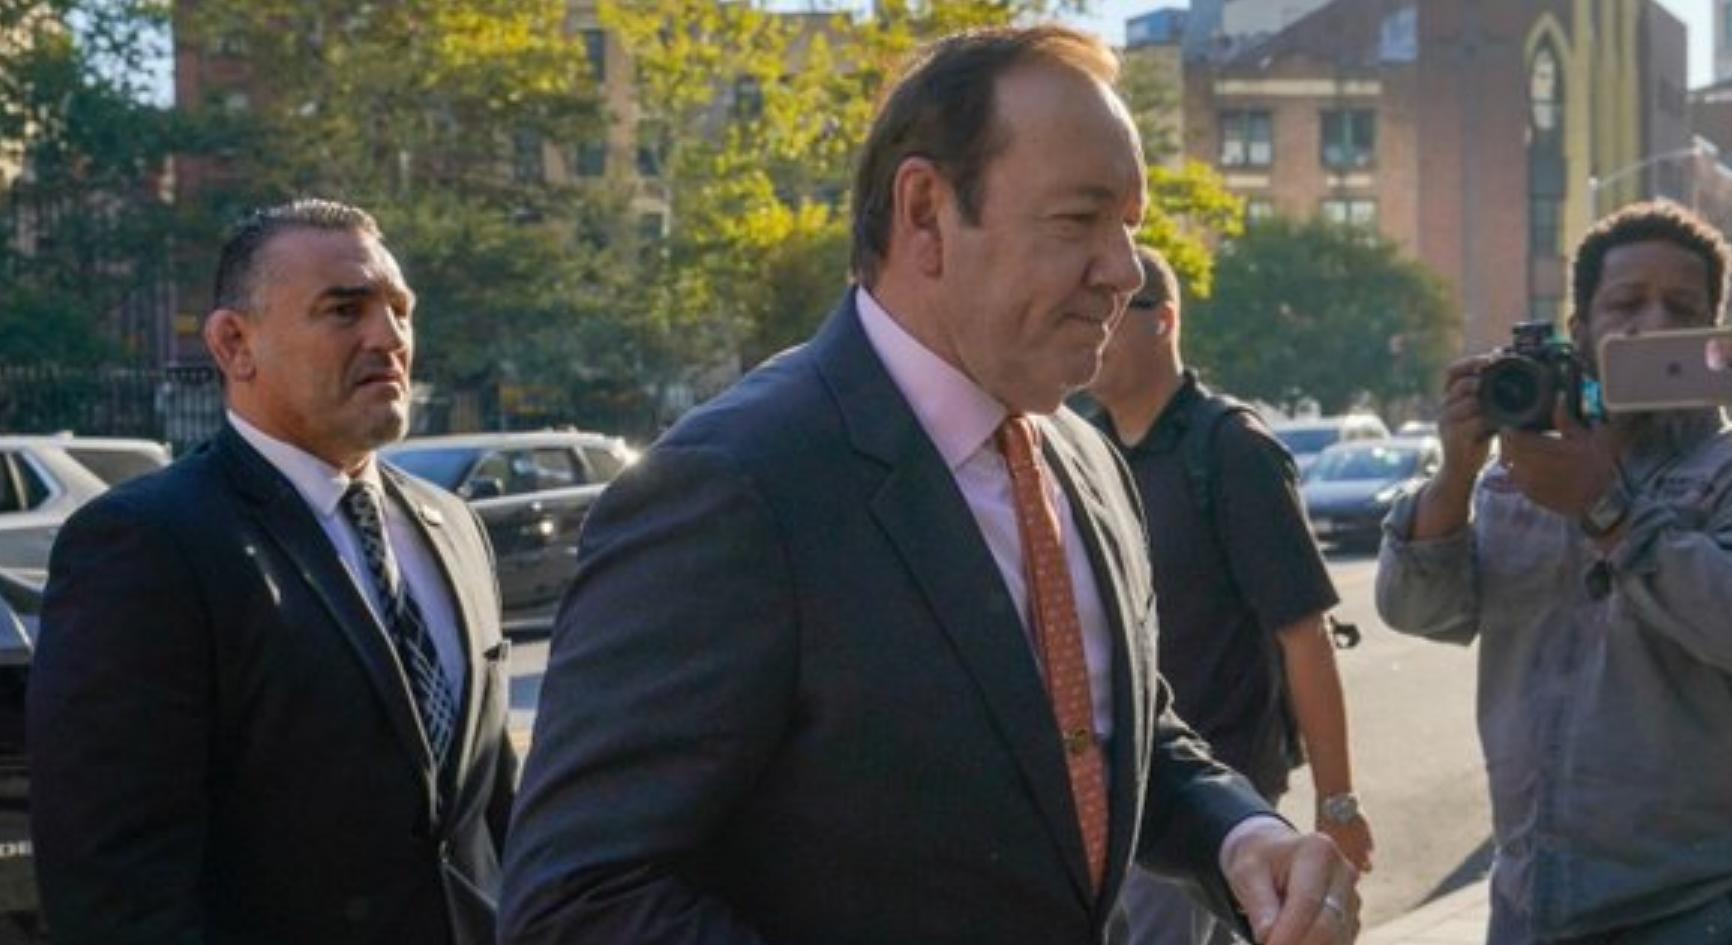 Actor Kevin Spacey found not liable by jury in sexual assault lawsuit